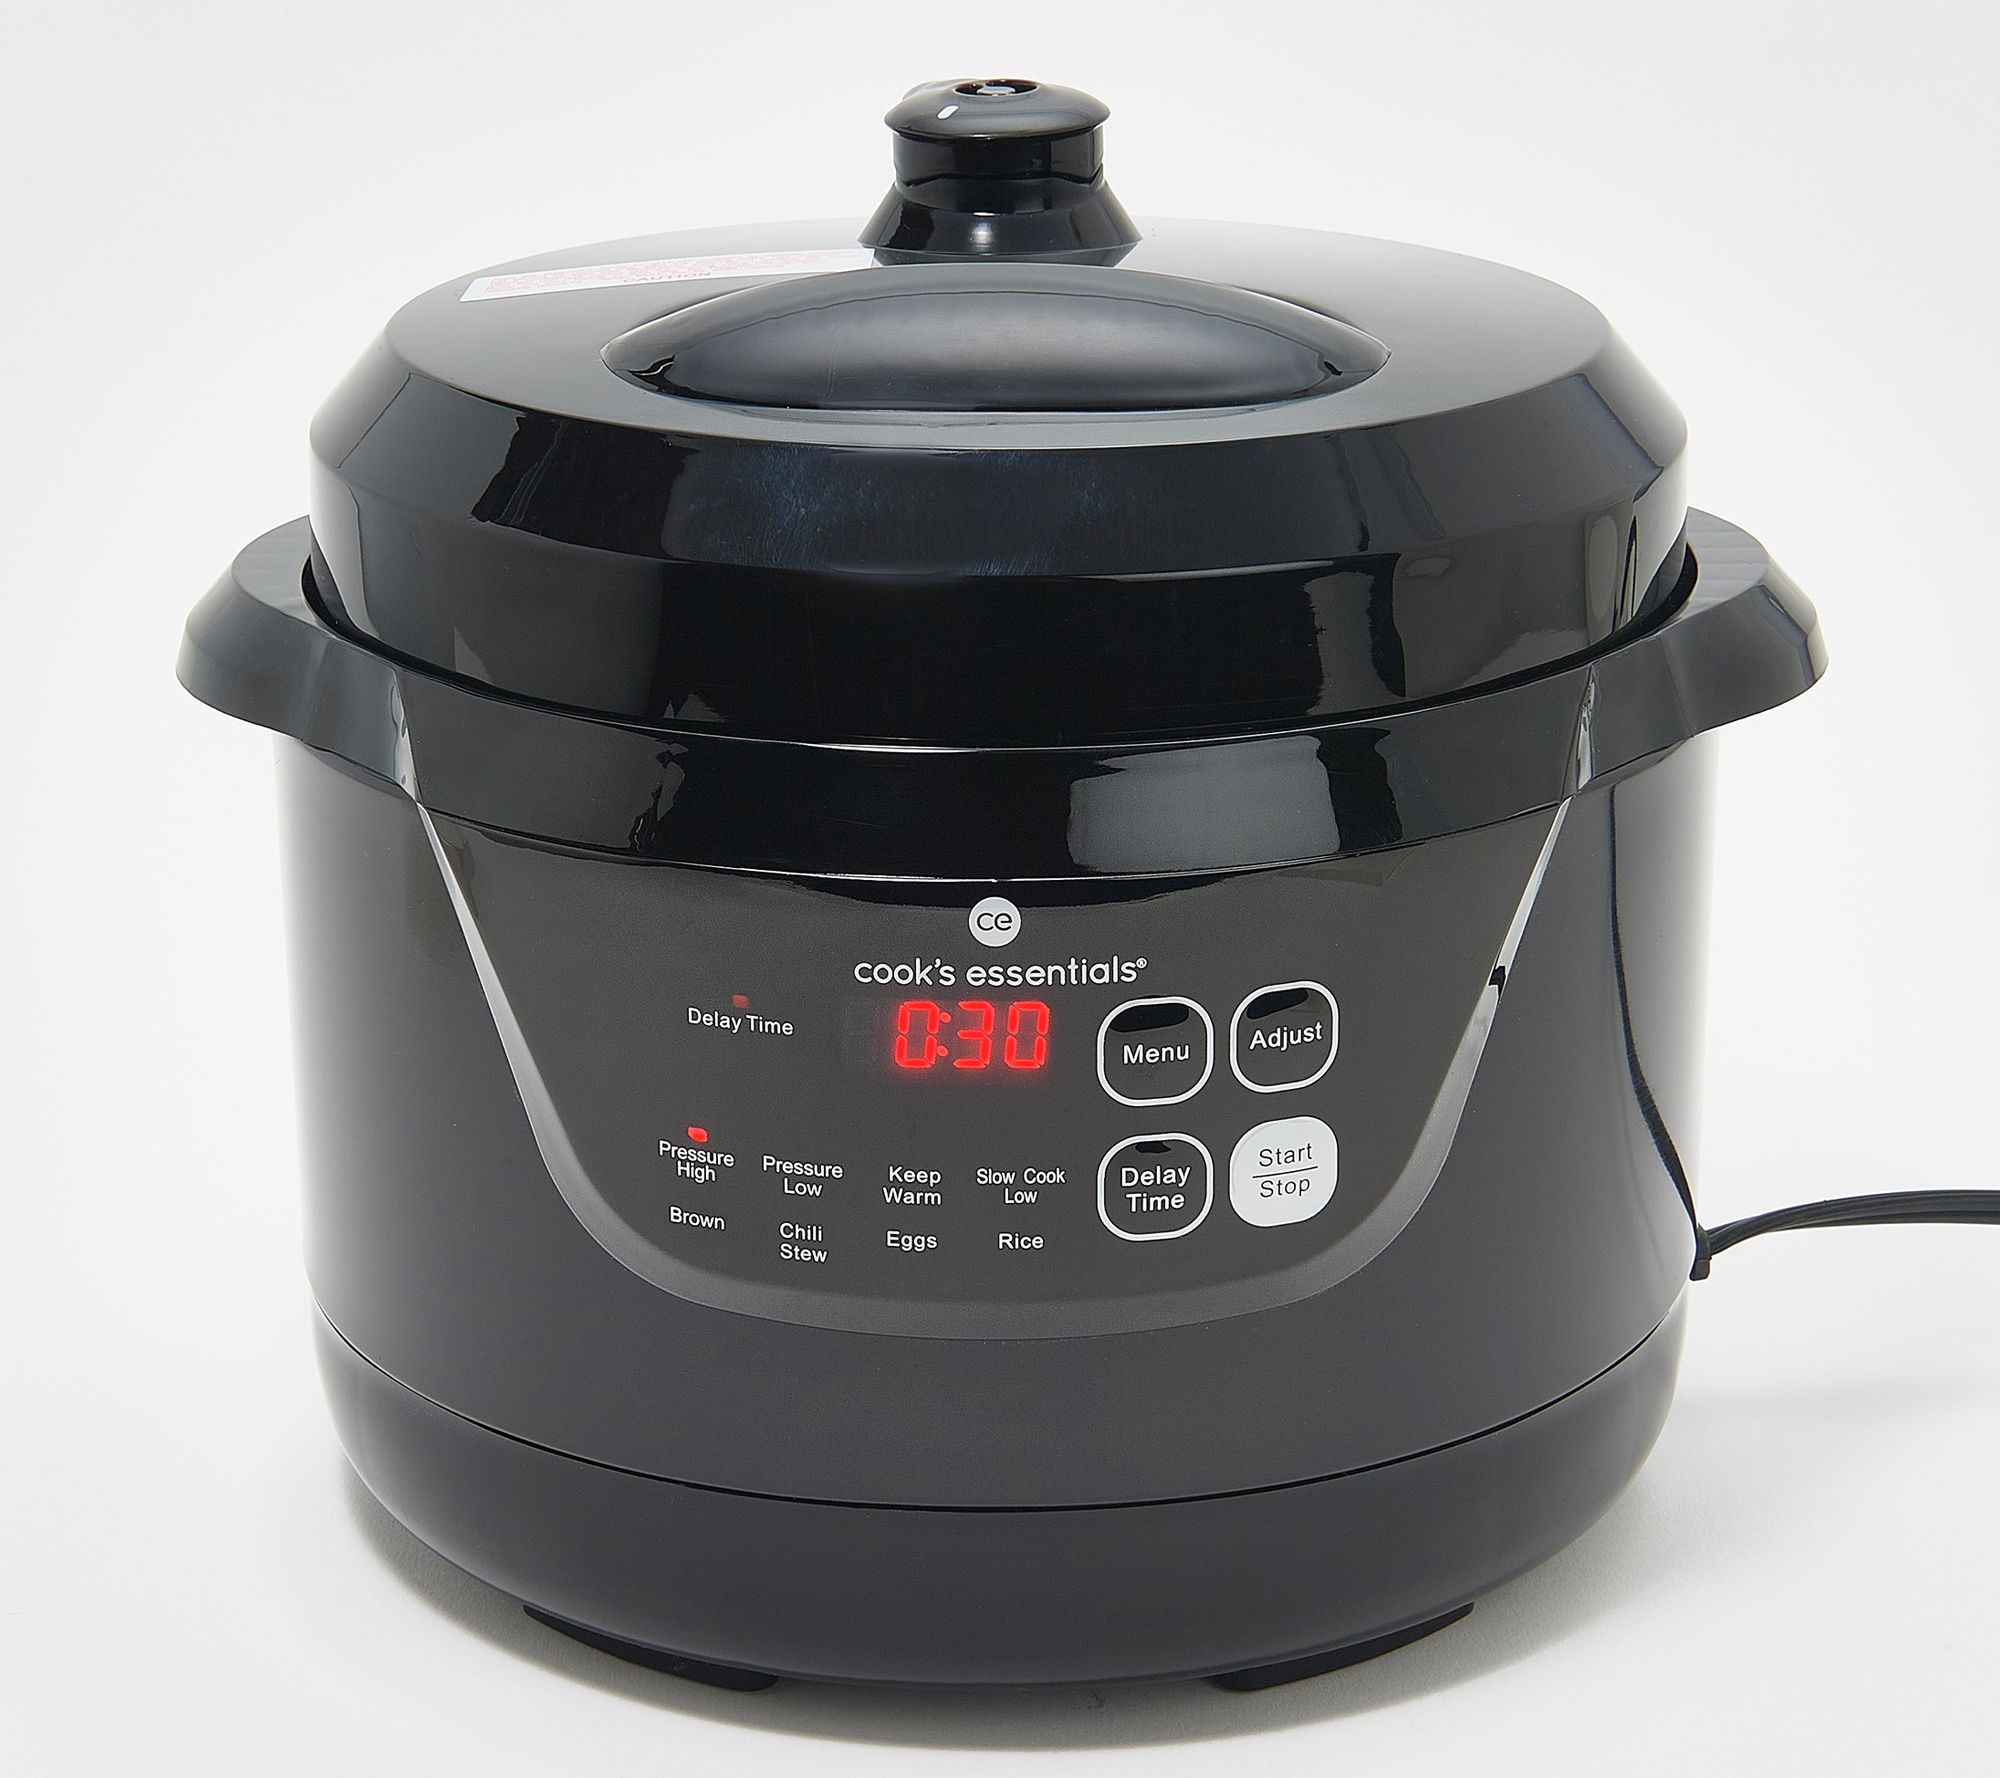 Video: Using the Cuisinart Pressure Cooker - Pressure Cooking Today™